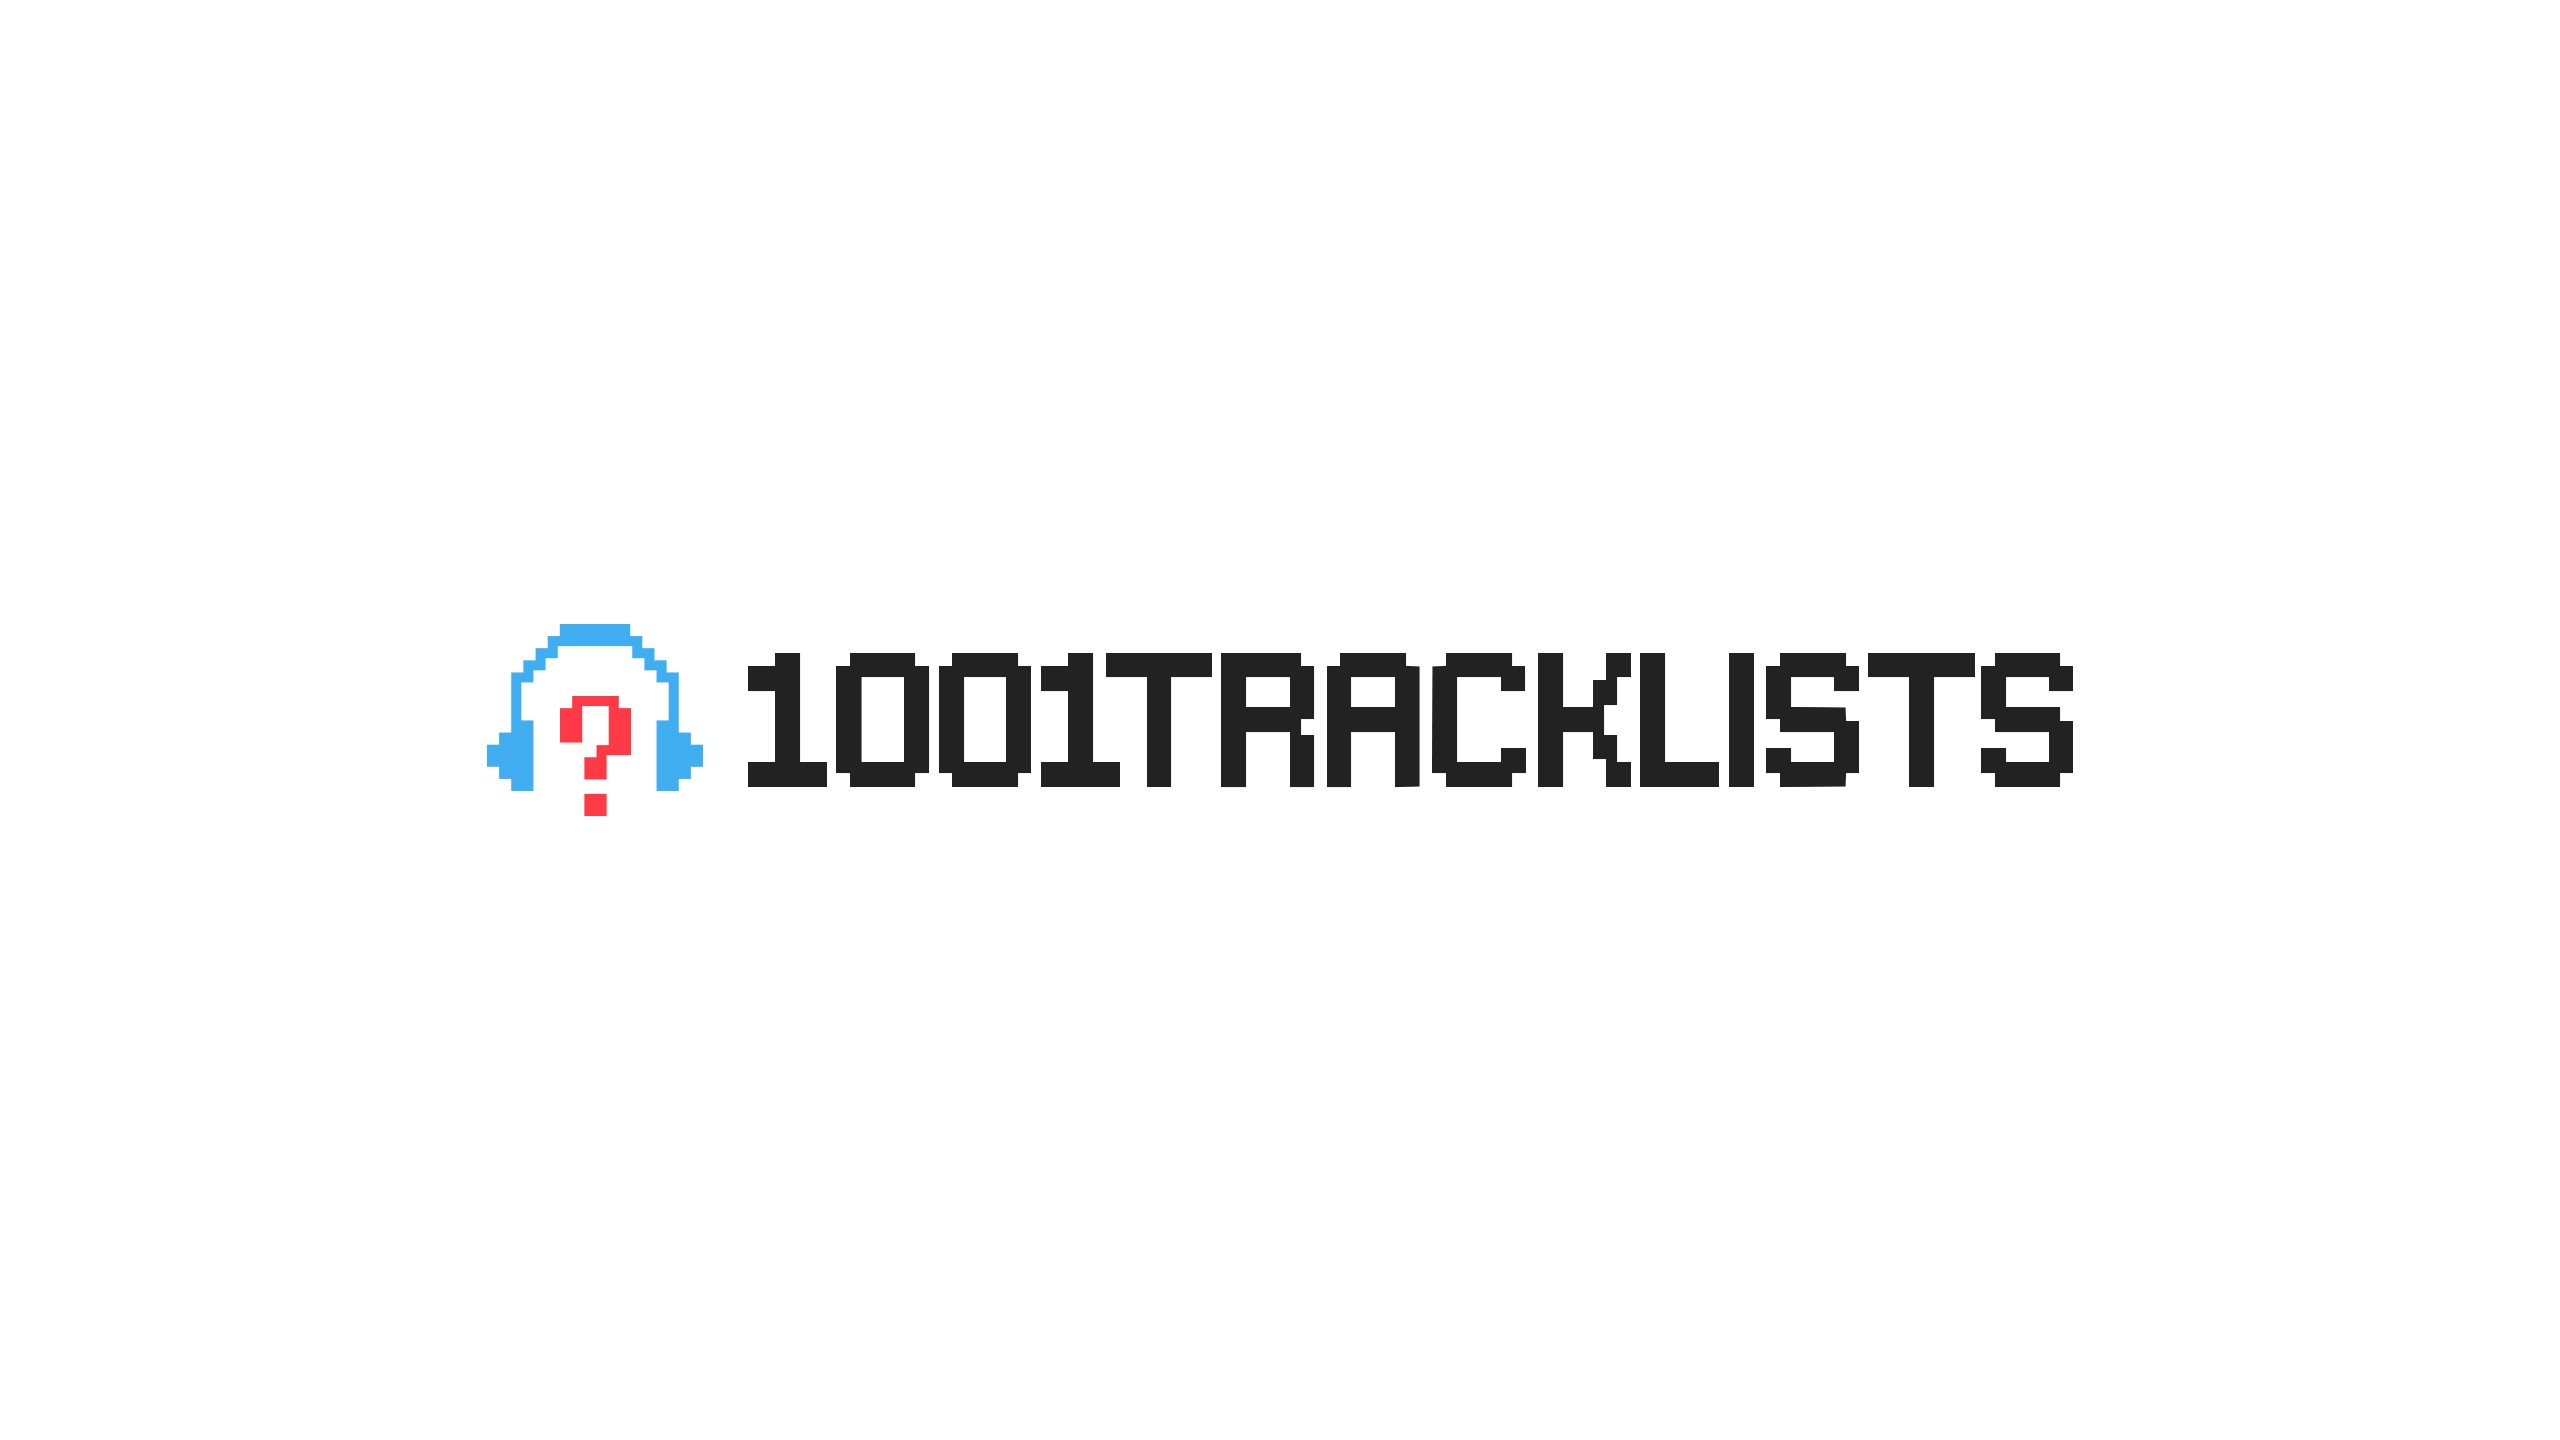 1001tracklists Linkedin Explore @1001tracklists twitter profile and download videos and photos 🌎🏅the world's we looked inside some of the tweets by @1001tracklists and here's what we found interesting. 1001tracklists linkedin